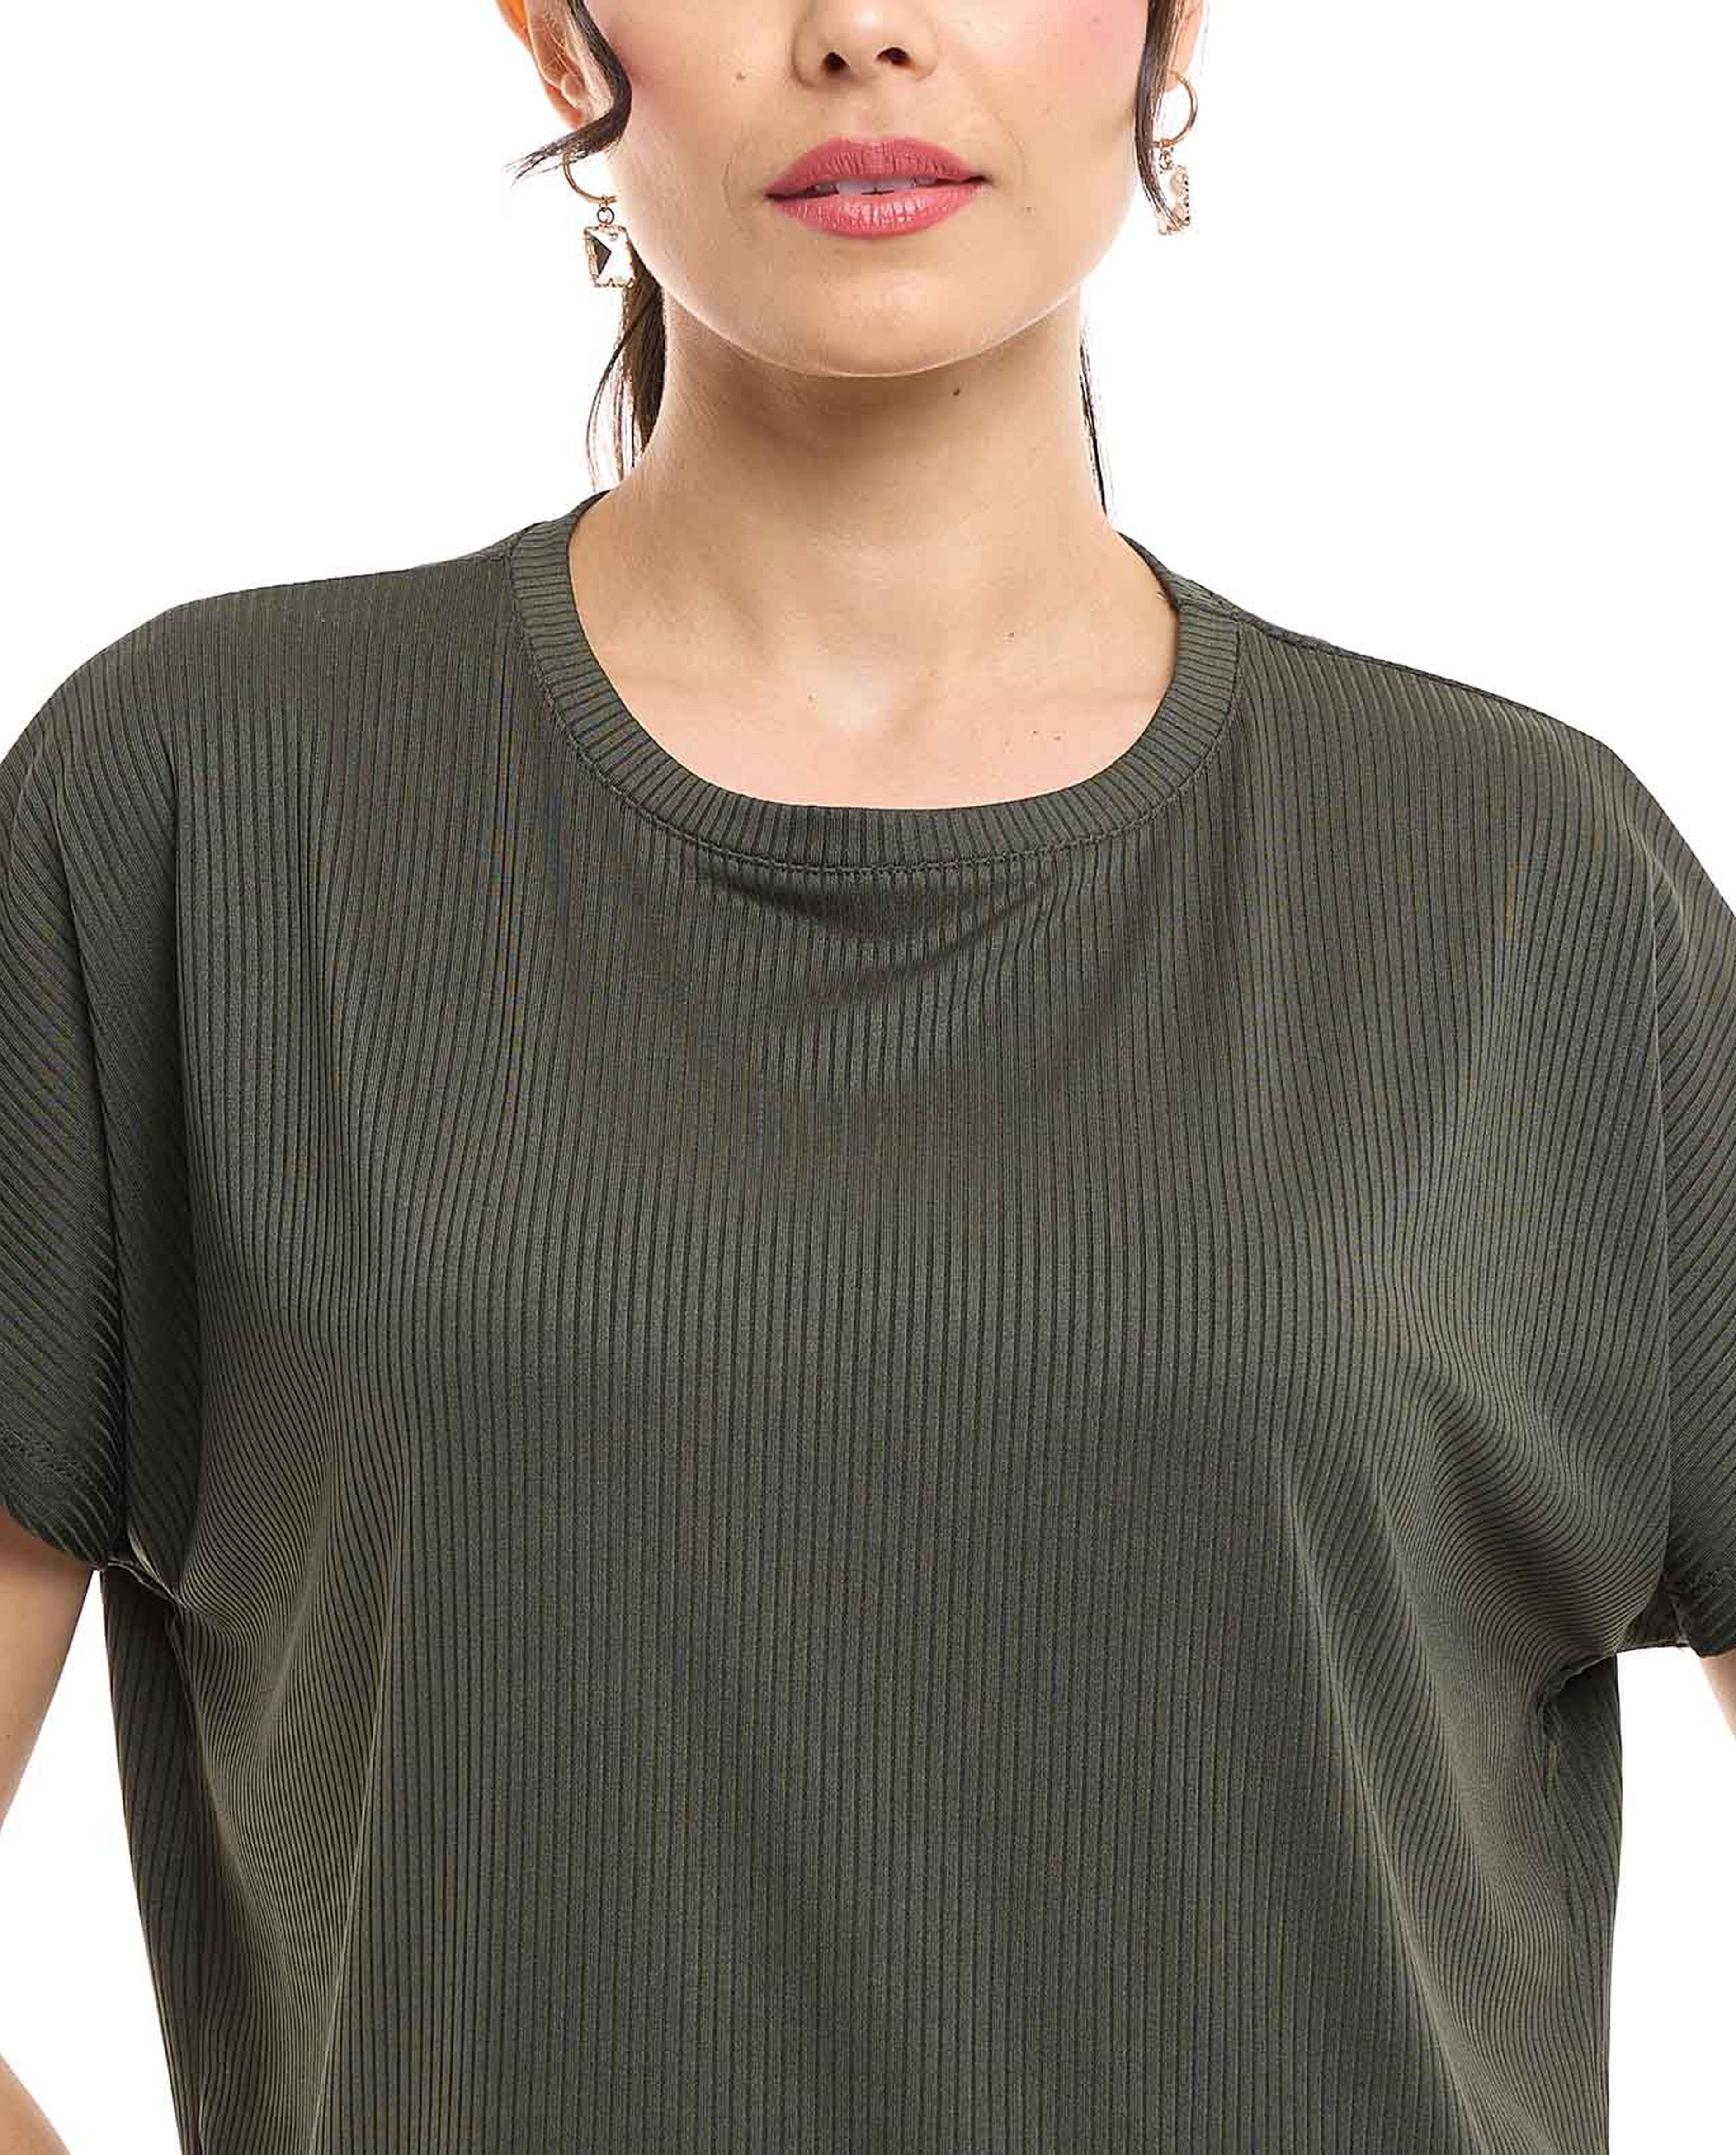 Ribbed Top with Crew Neck and Short Sleeves